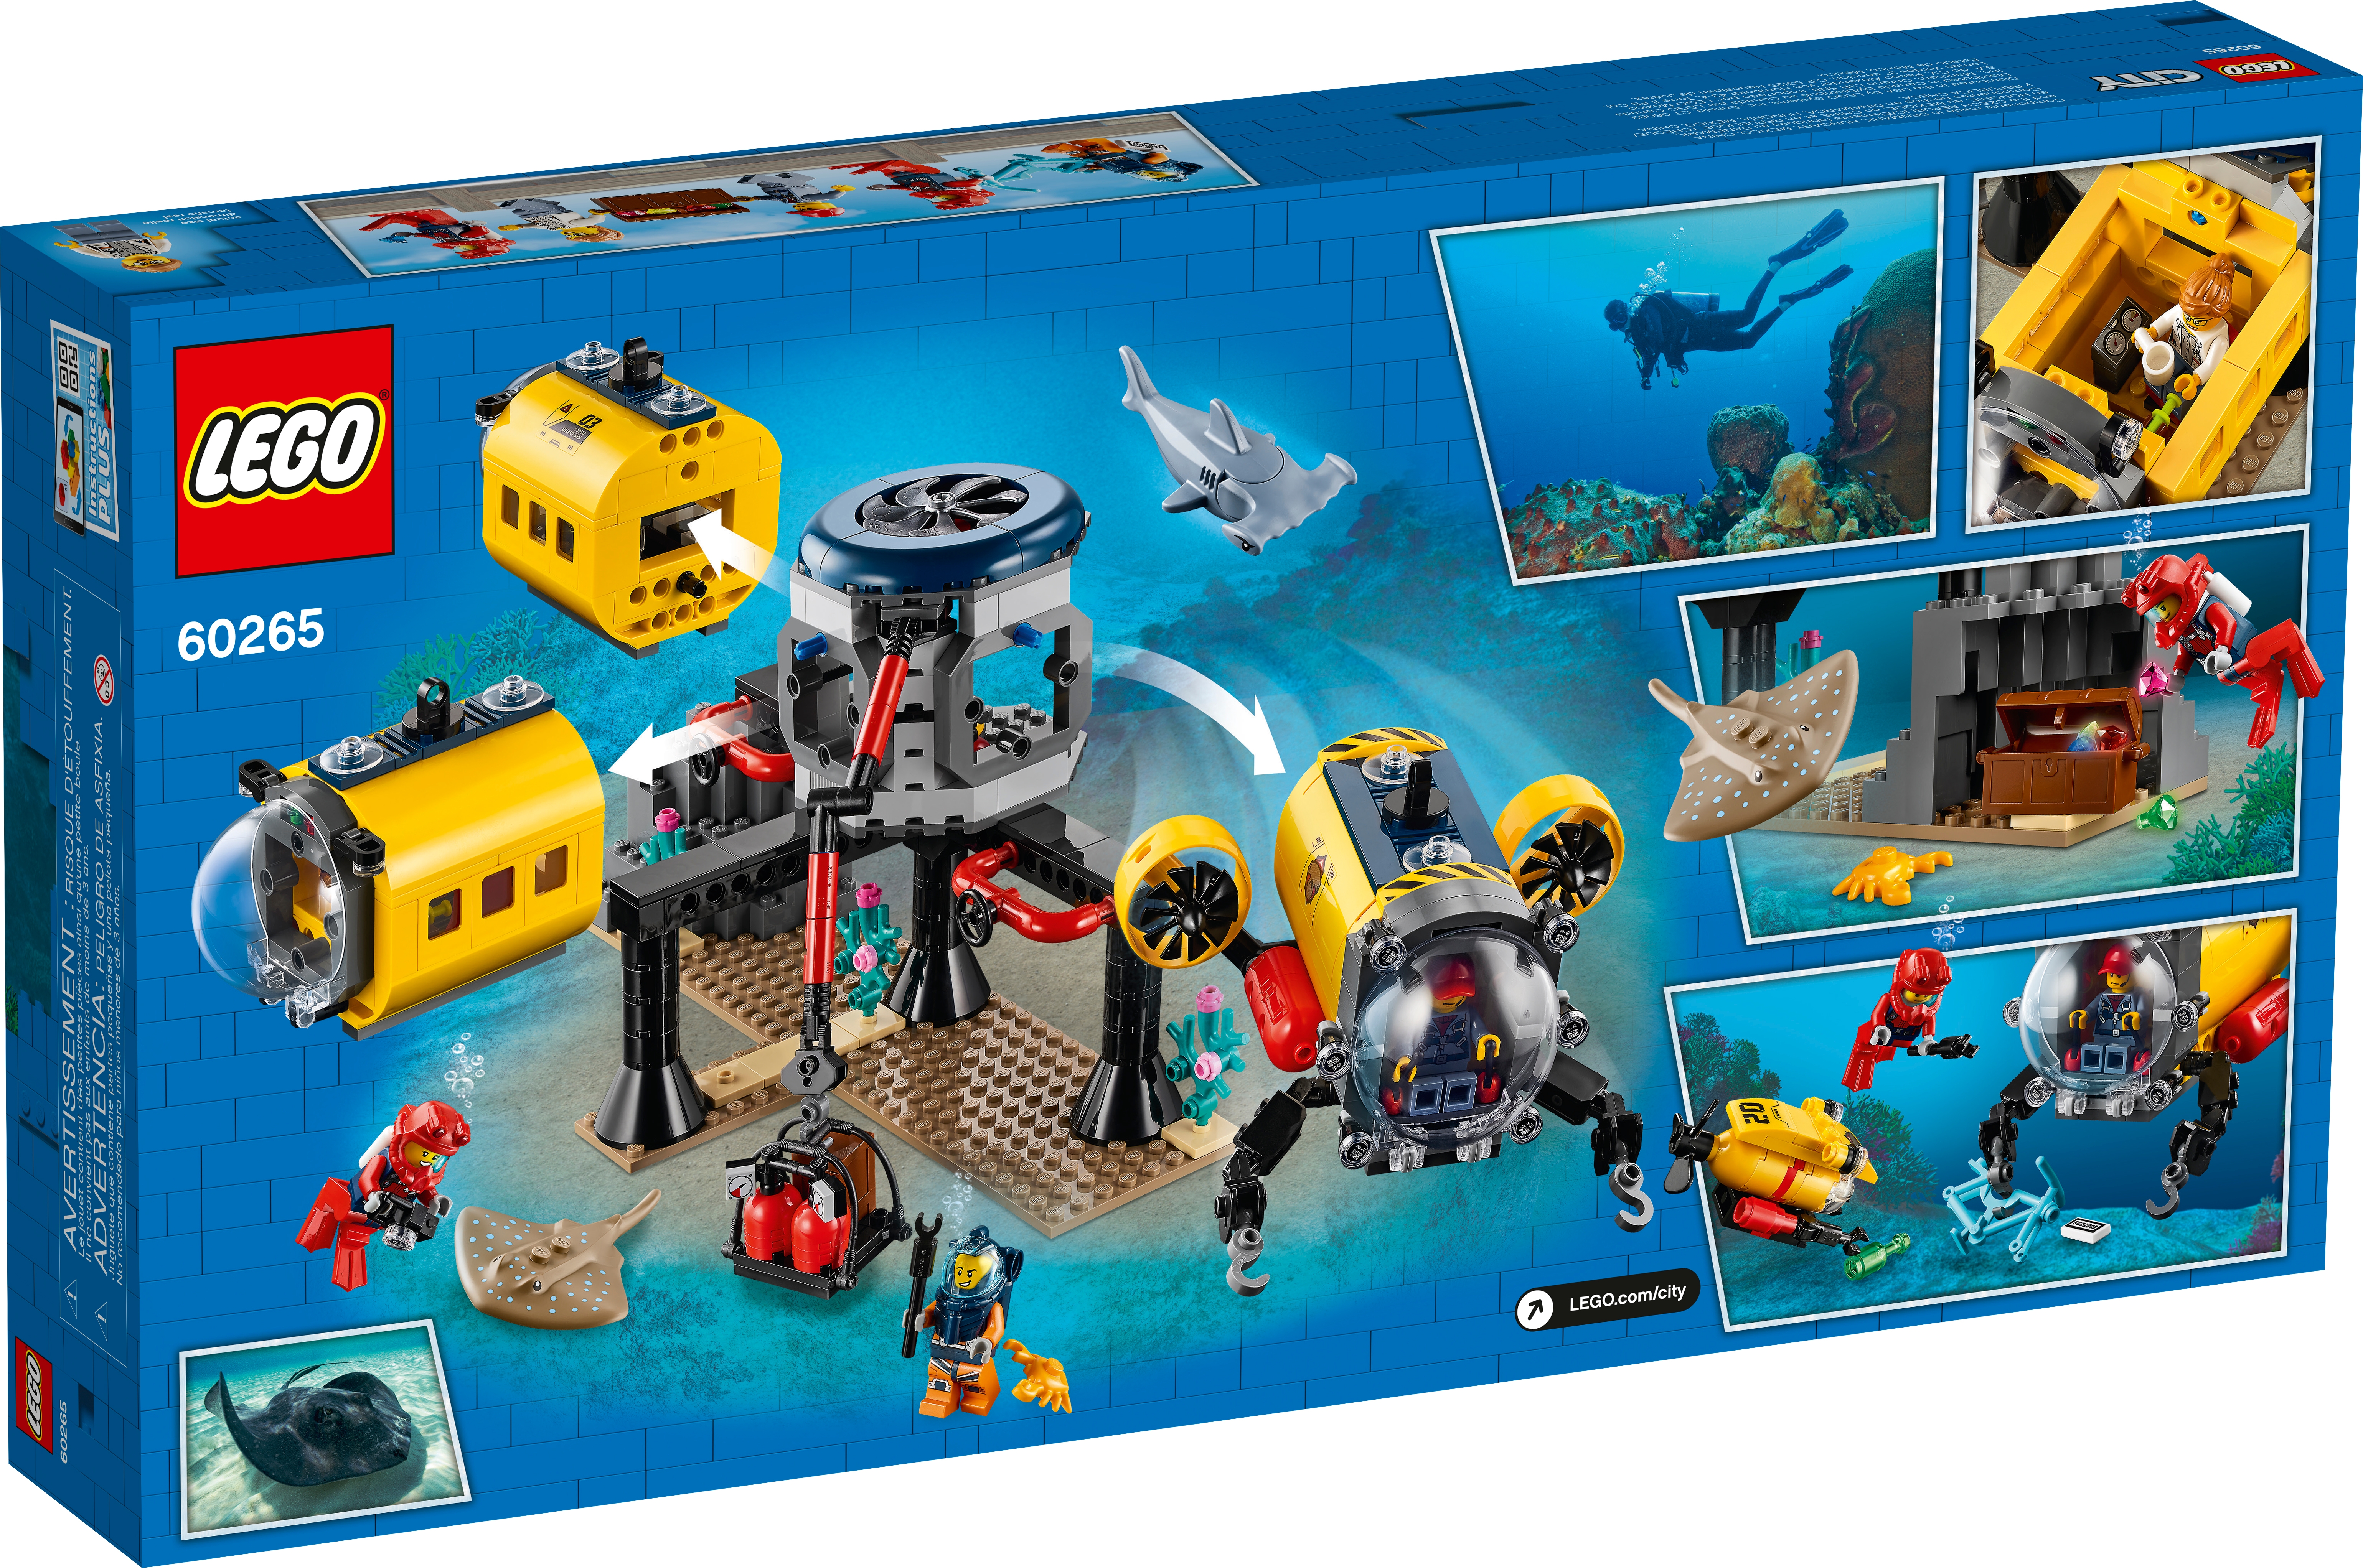 60265 LEGO City Ocean Exploration Base Playset 497 Pieces Age 6 Years+ 